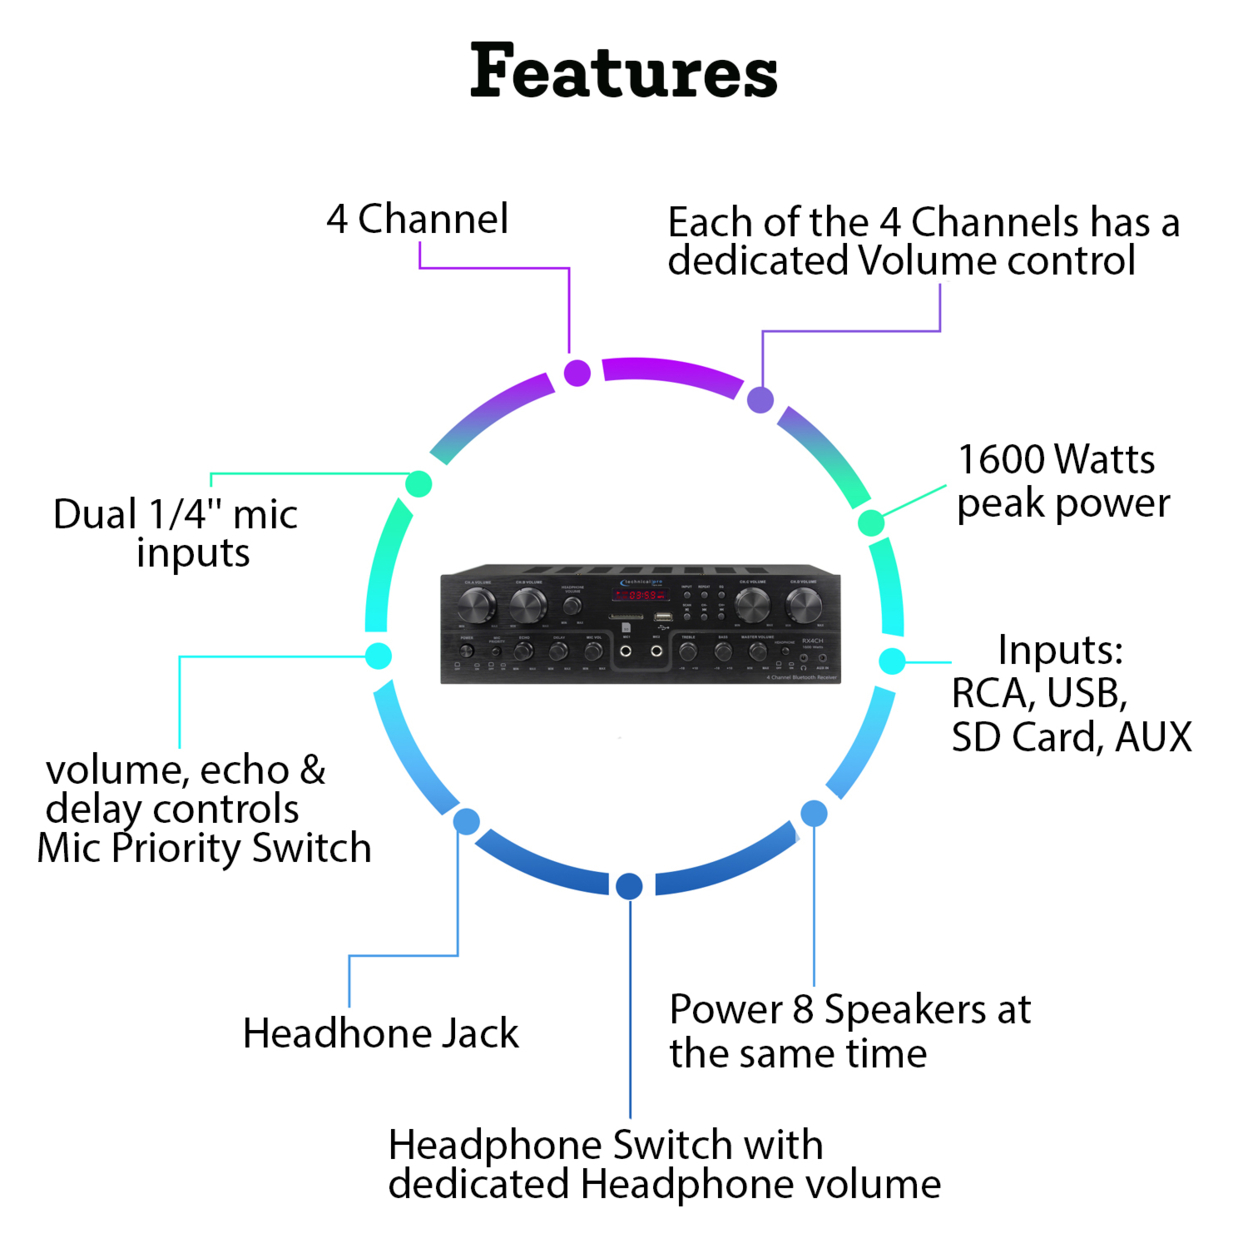 Technical Pro 1600 Watts 4 Channel, 8 Speaker Bluetooth Receiver W/ RCA, USB, SD Card, AUX And 2 Mic Inputs For Home Theater System